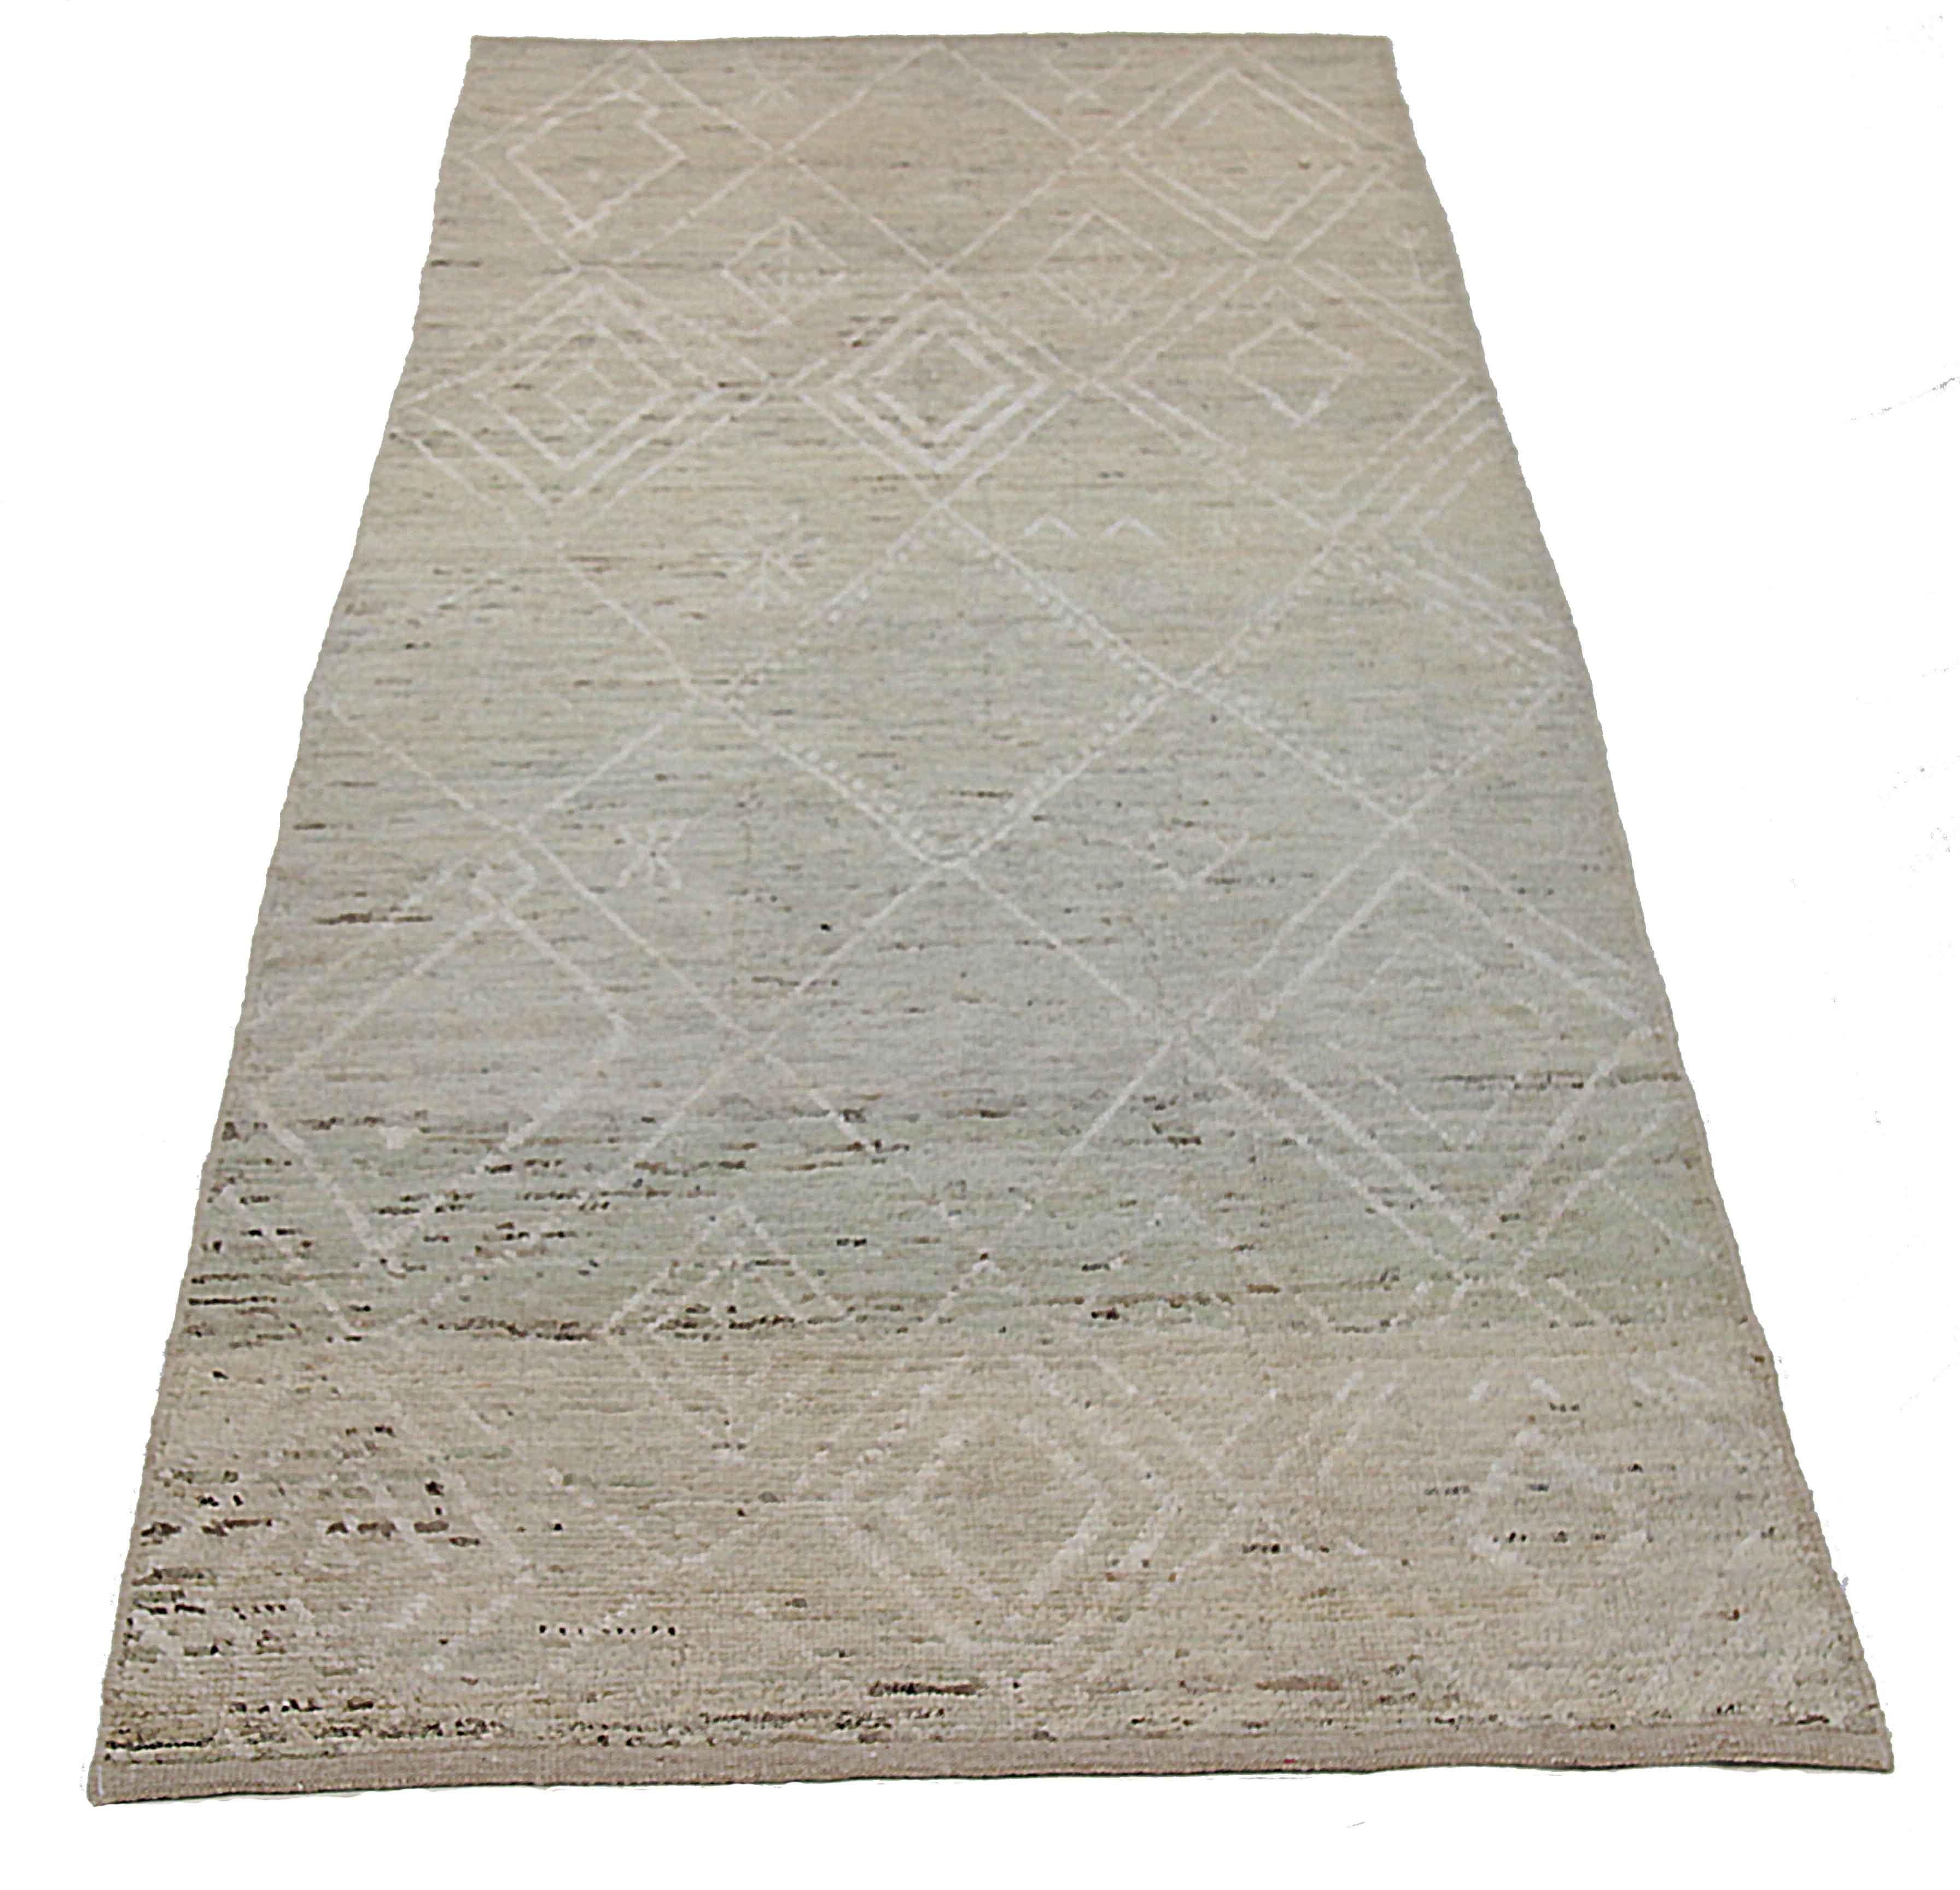 Modern Afghan rug handwoven from the finest sheep’s wool. It’s colored with all-natural vegetable dyes that are safe for humans and pets. This piece is a traditional Afghan weaving featuring a Moroccan inspired design. It’s highlighted by white